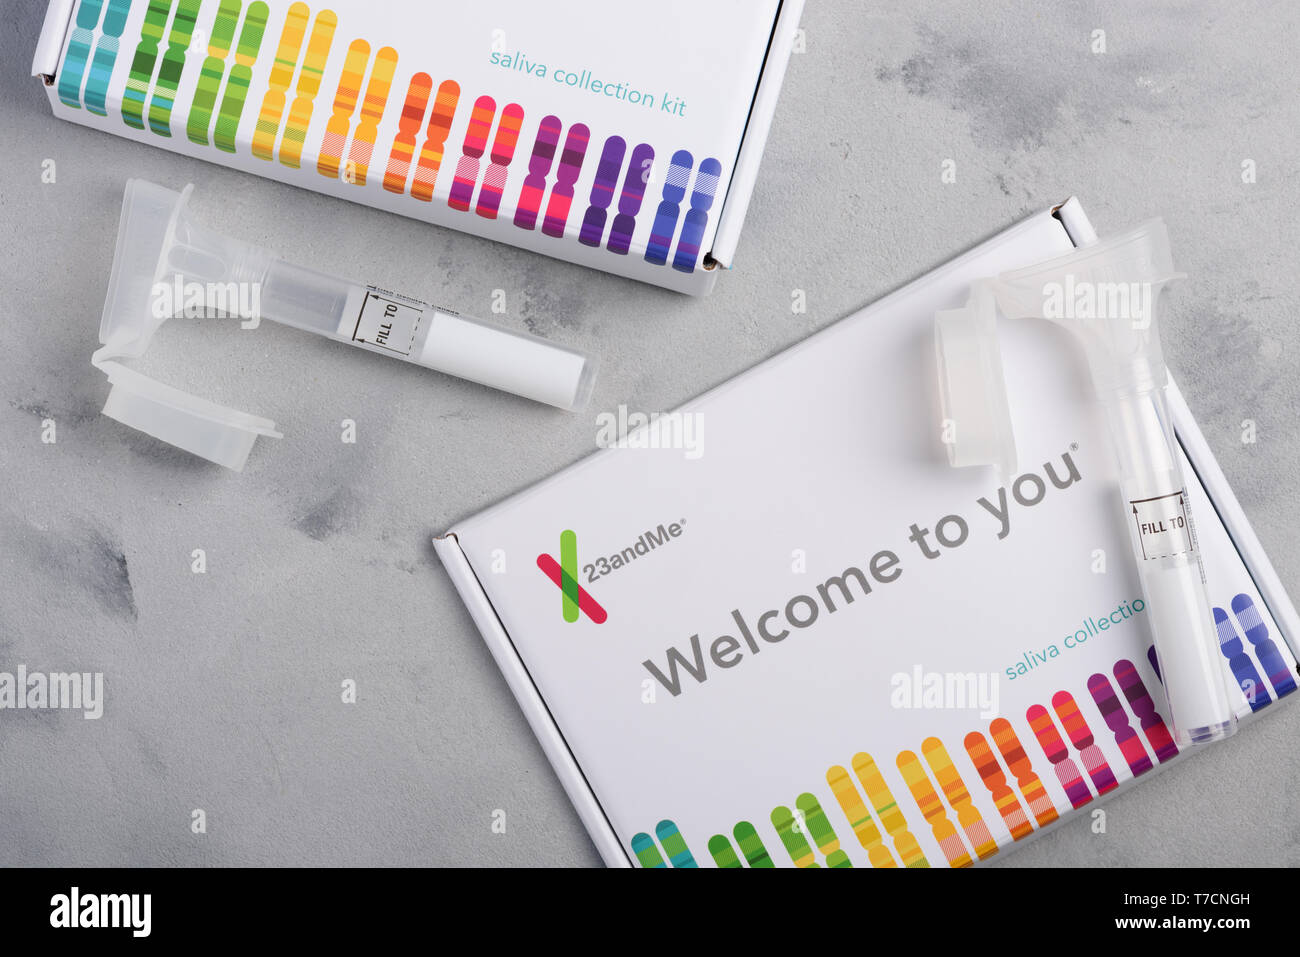 Kiev, Ukraine - 17 October 2018: 23andMe personal genetic test saliva collection kit, with tube and box on table overhead view. Illustrative editorial Stock Photo